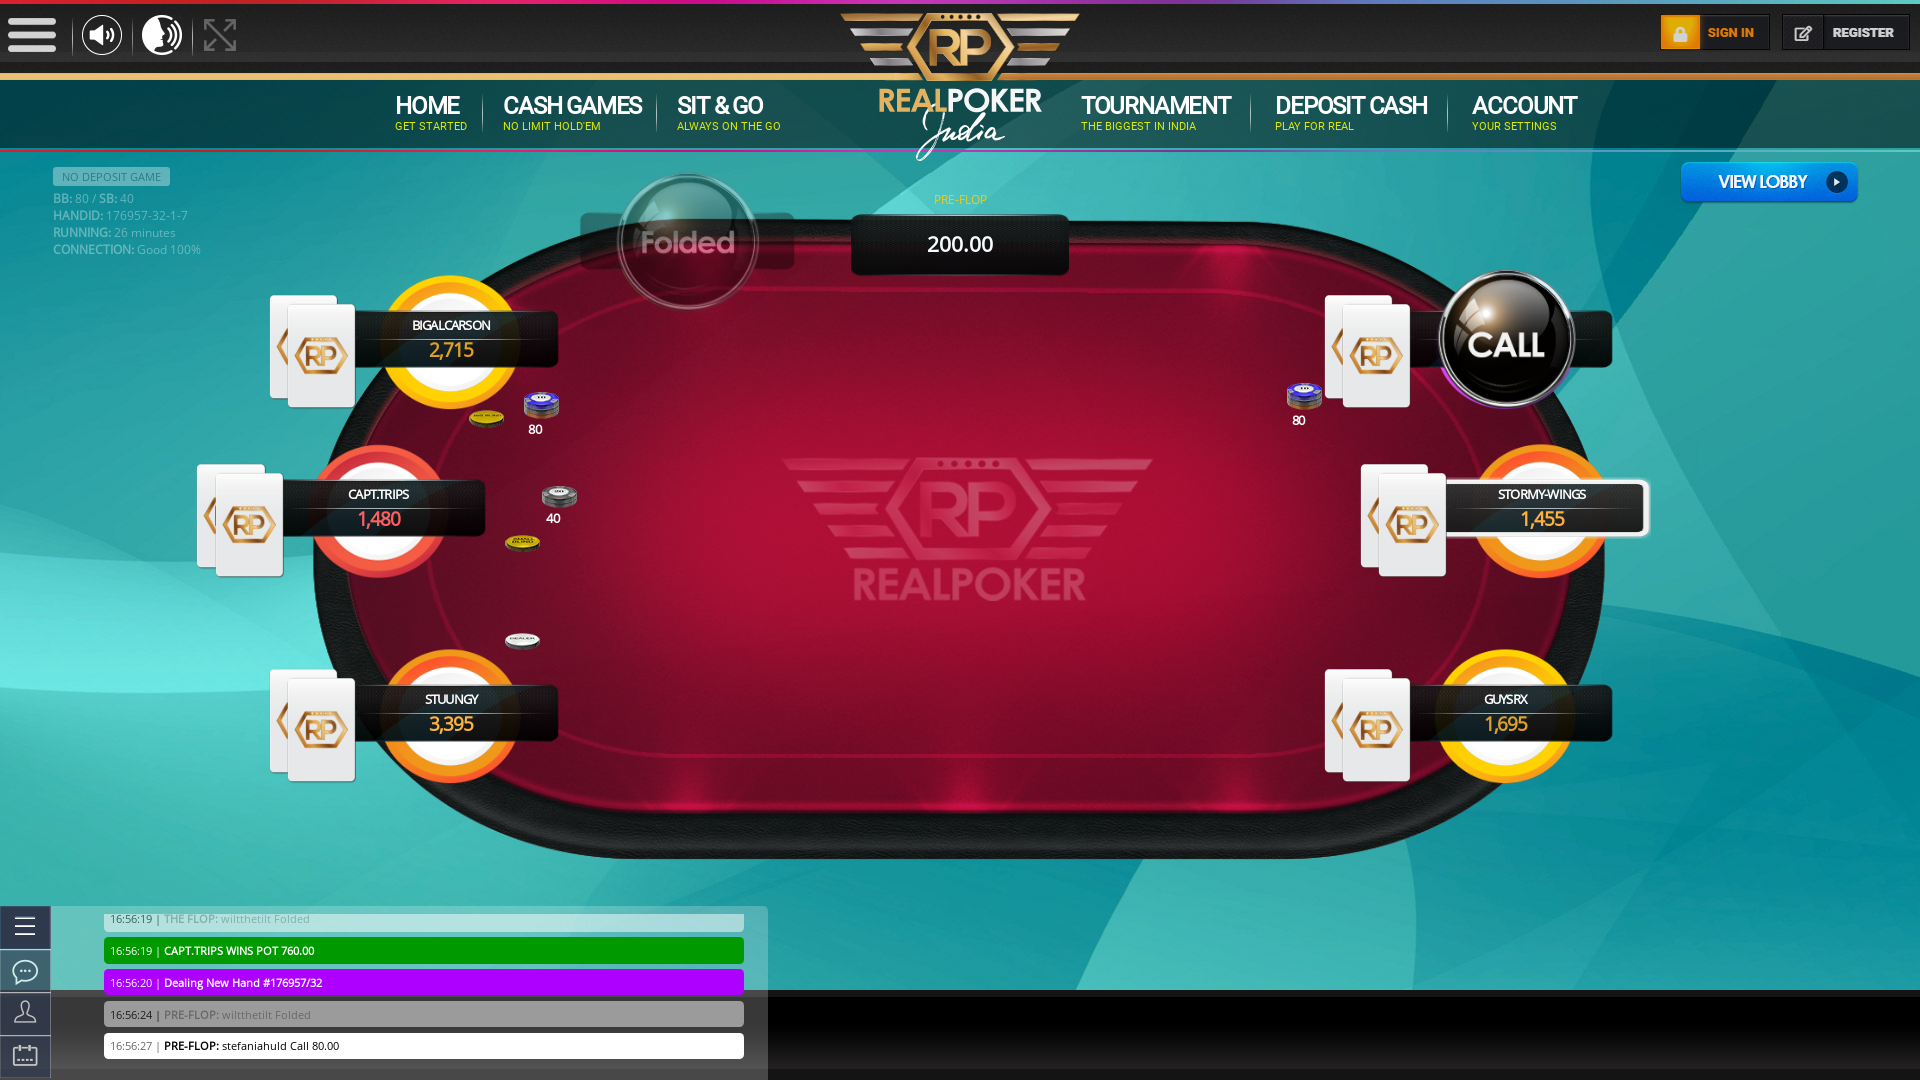 Real poker 10 player table in the 25th minute of the match